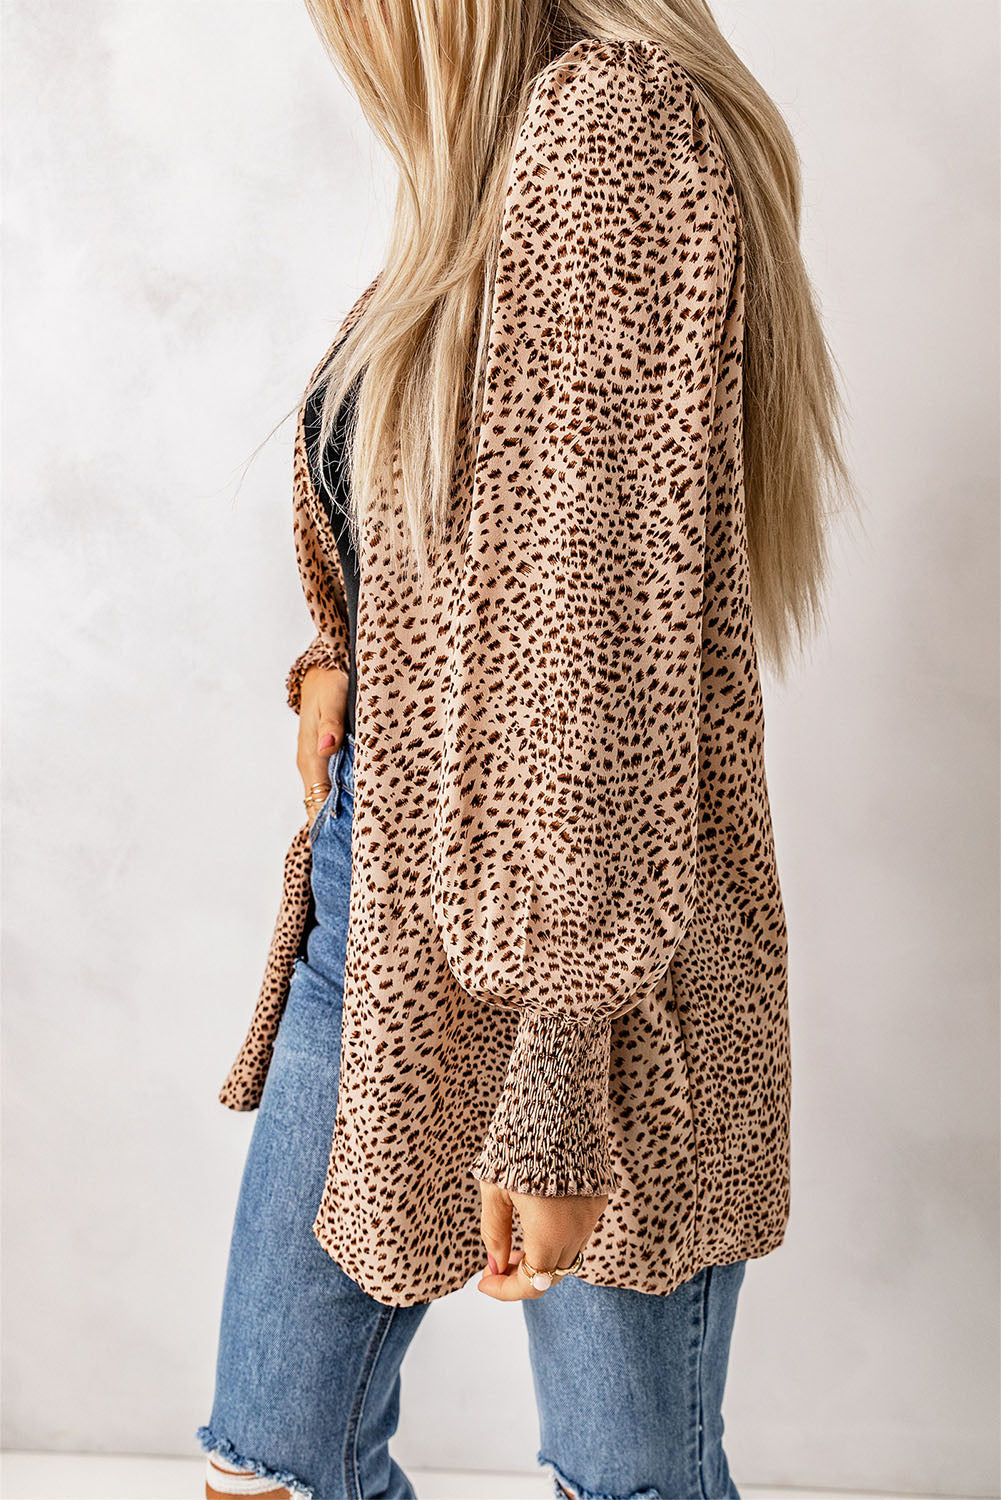 Leopard Print Balloon Sleeve Cardigan - Women’s Clothing & Accessories - Shirts & Tops - 3 - 2024